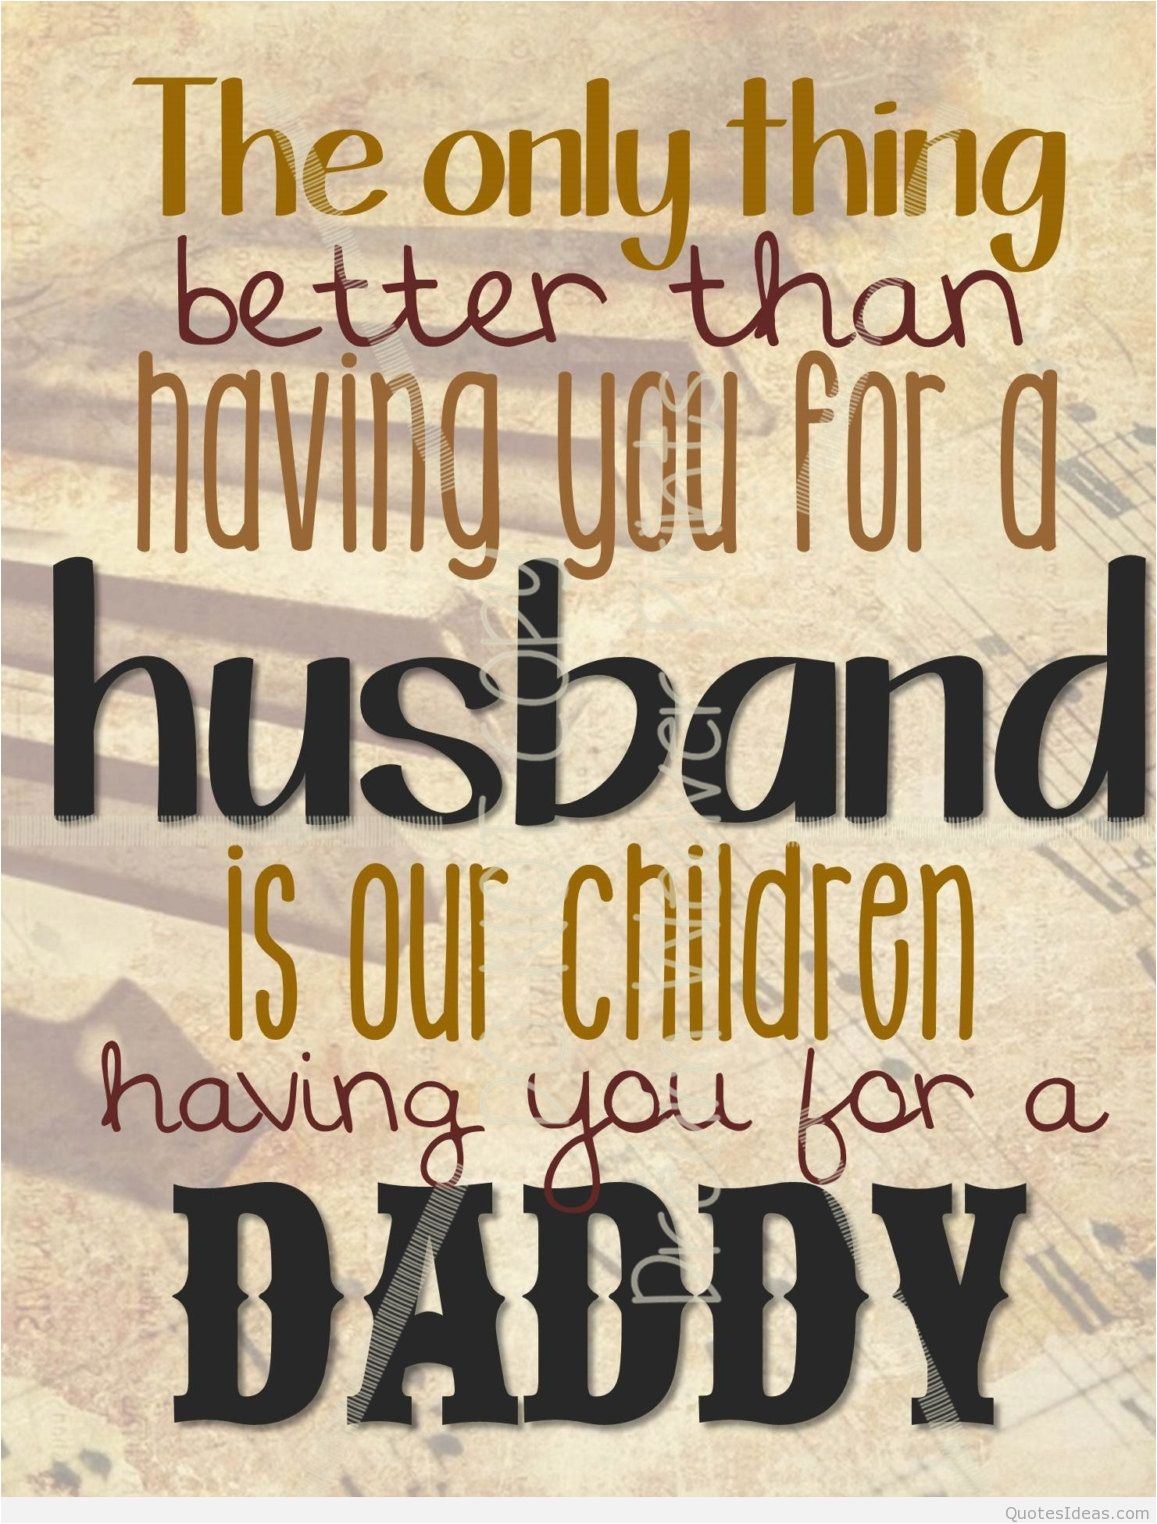 happy birthday dad quotes sayings